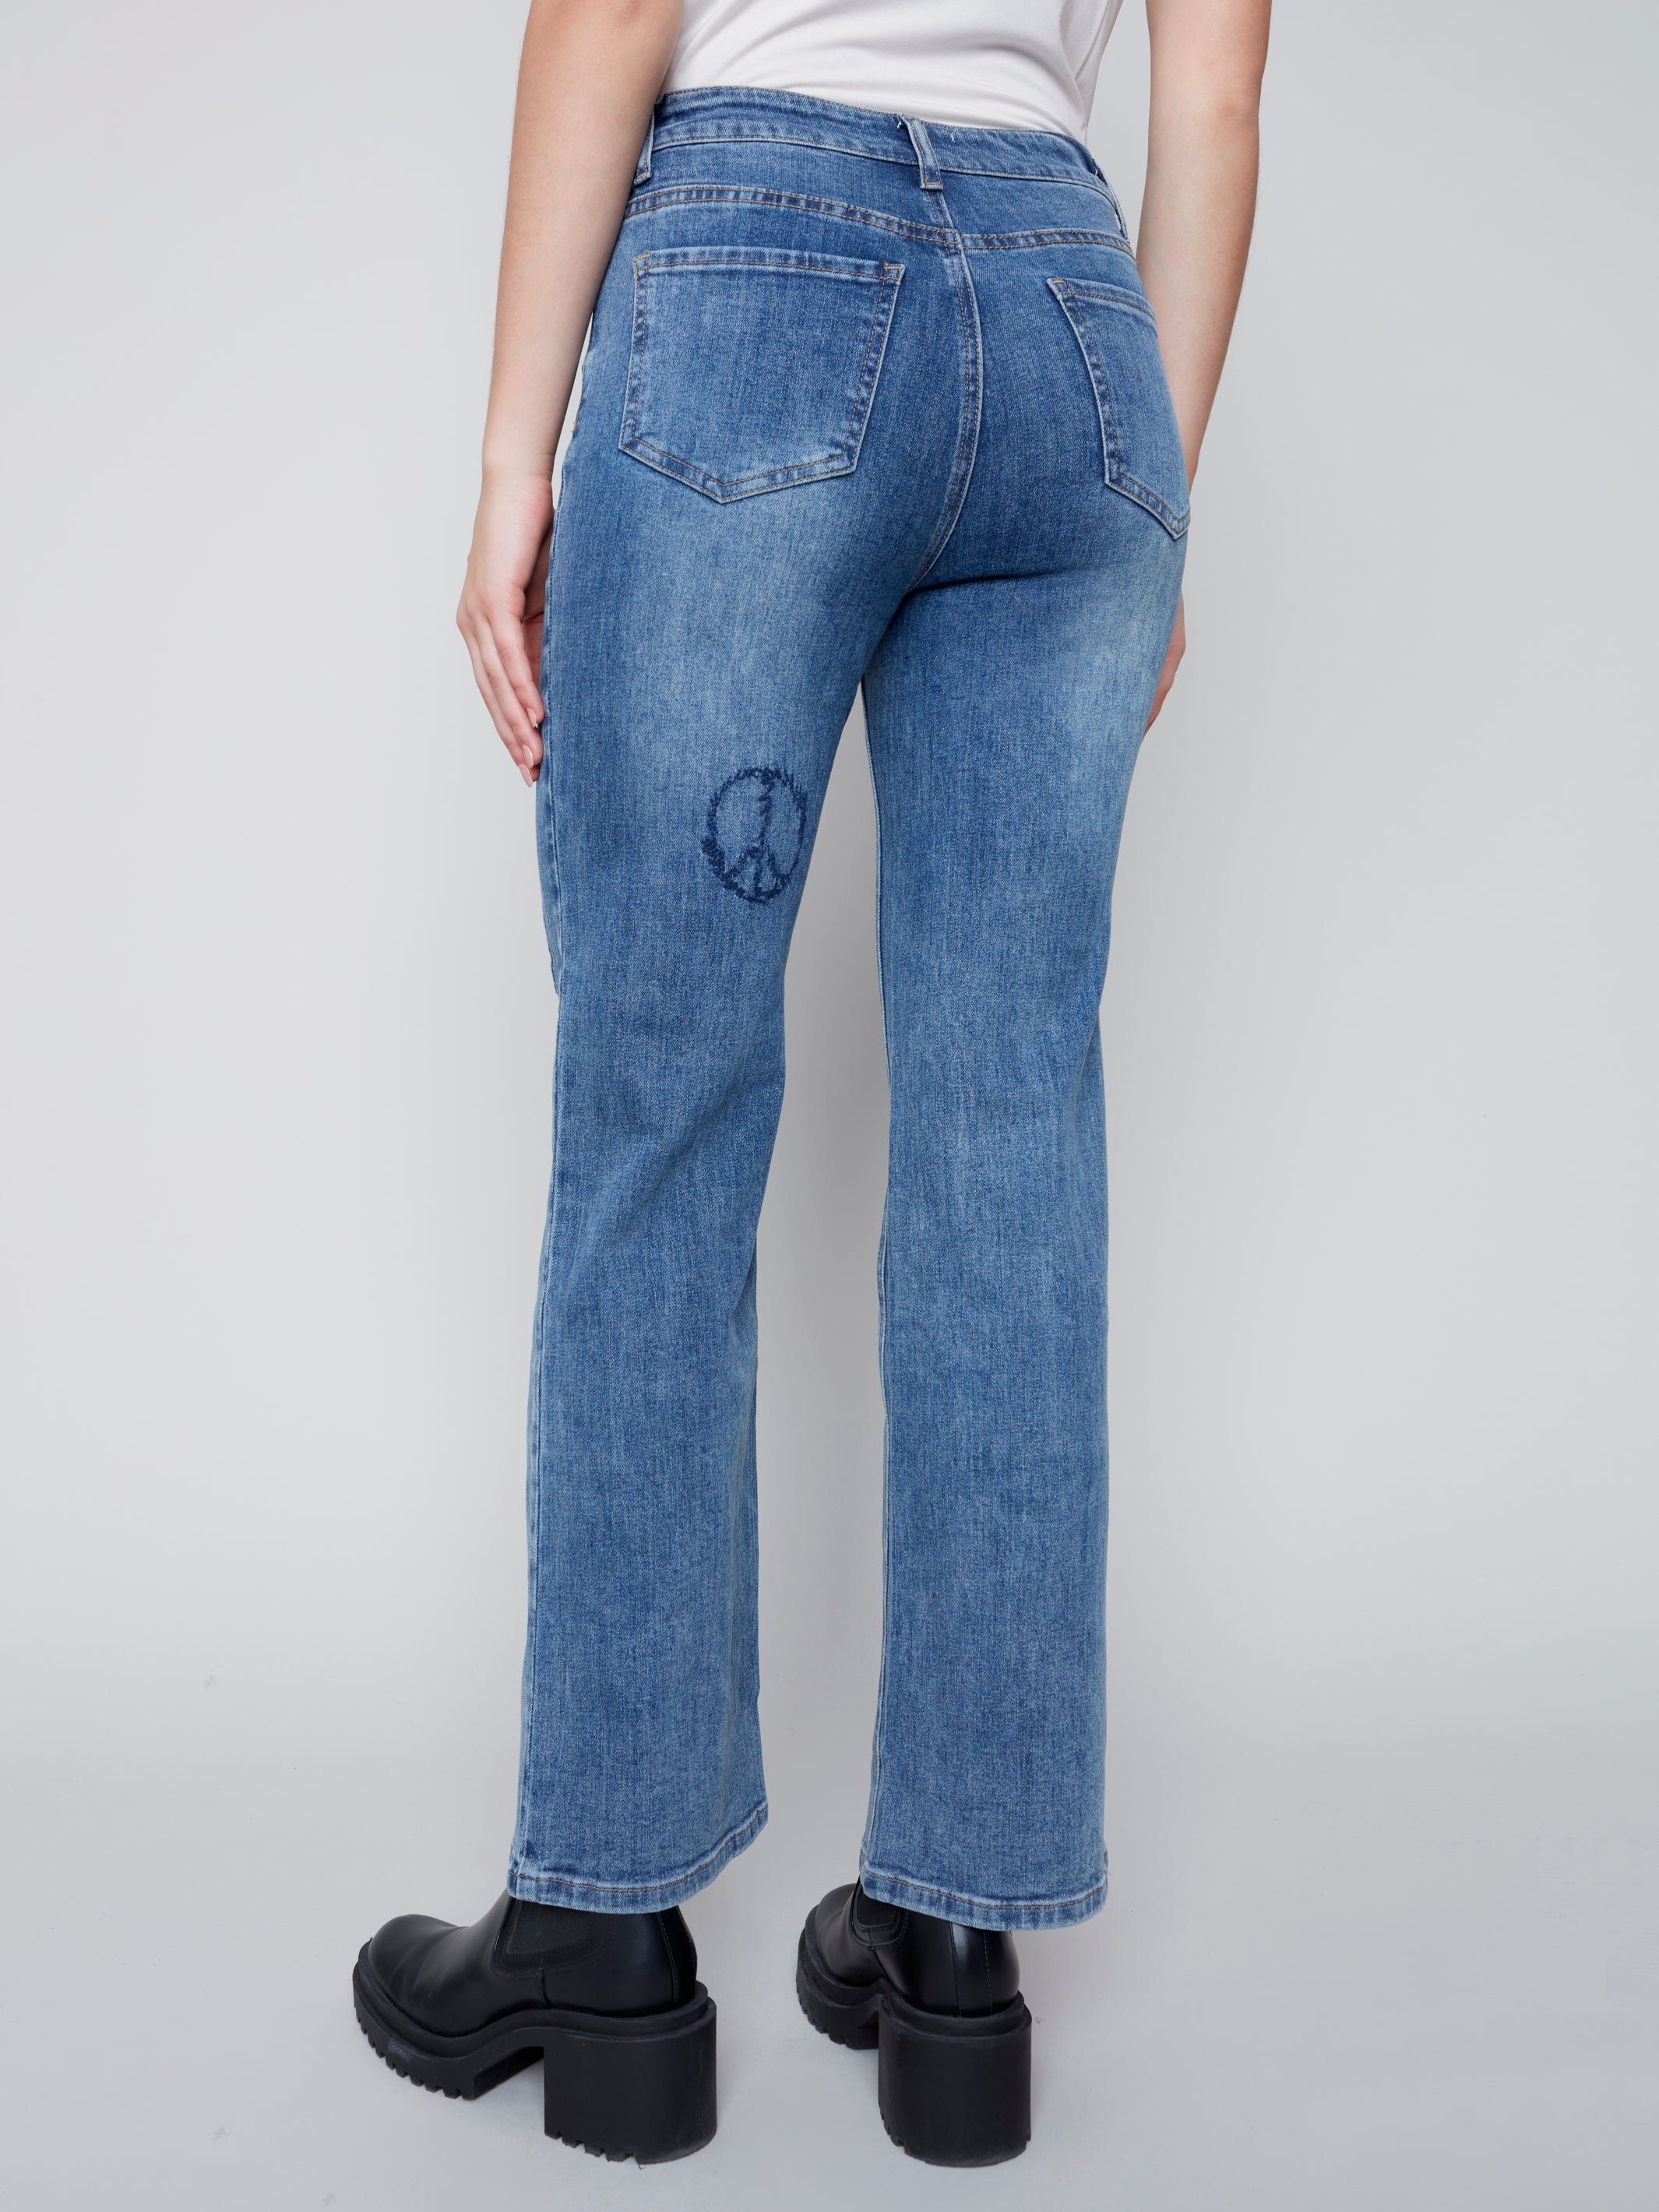 Straight Leg Jeans with Heart Embroidery by Charlie B